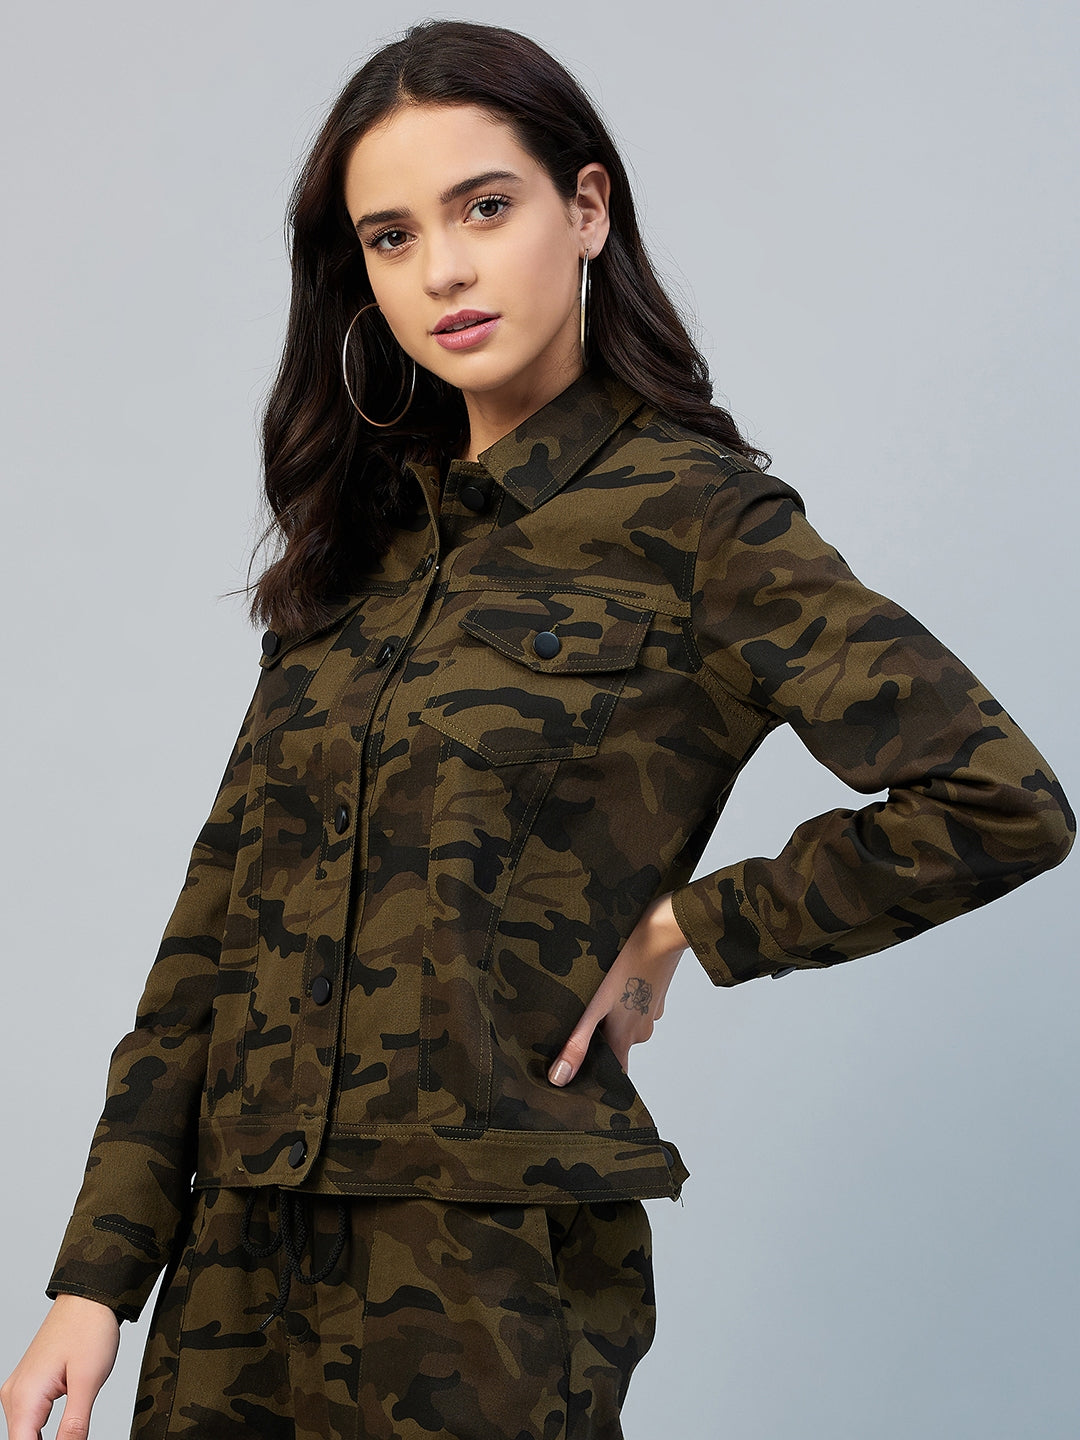 Buy EBRY Cotton Fabric Digital Print | Casual | Full Sleeves Jacket For  Women (small) at Amazon.in